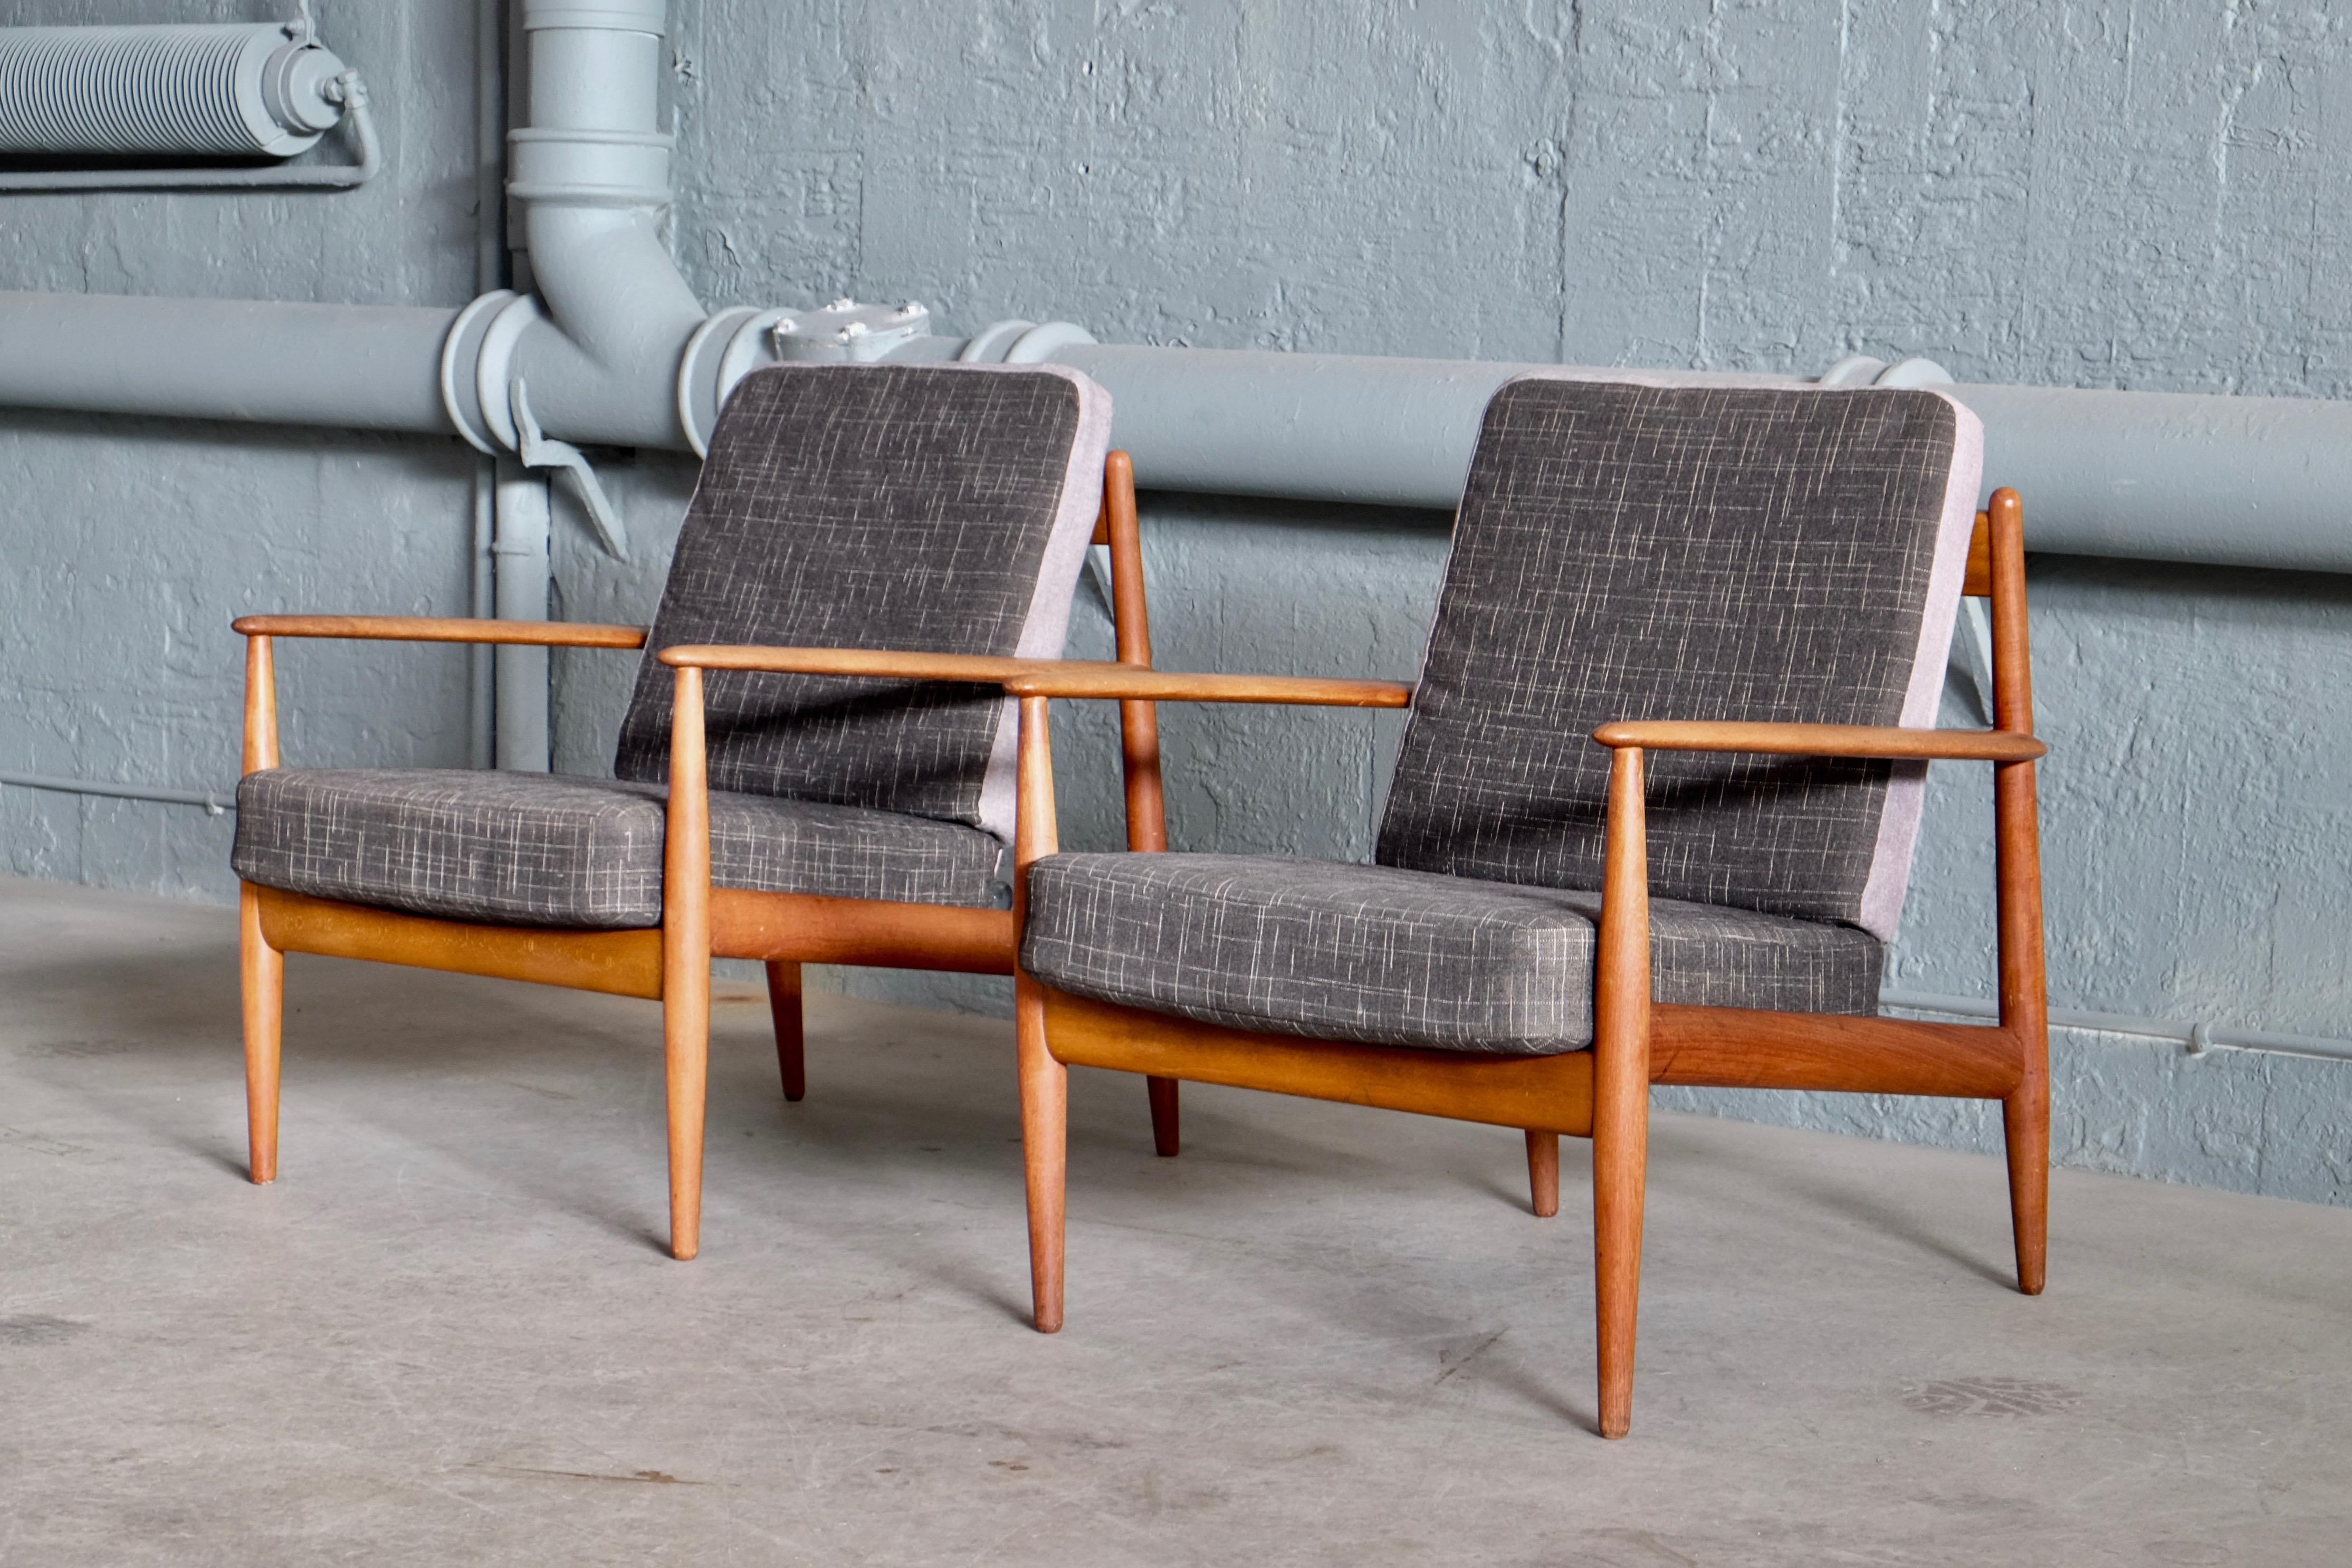 Great pair of easy chairs by Grete Jalk, Denmark, 1950s.